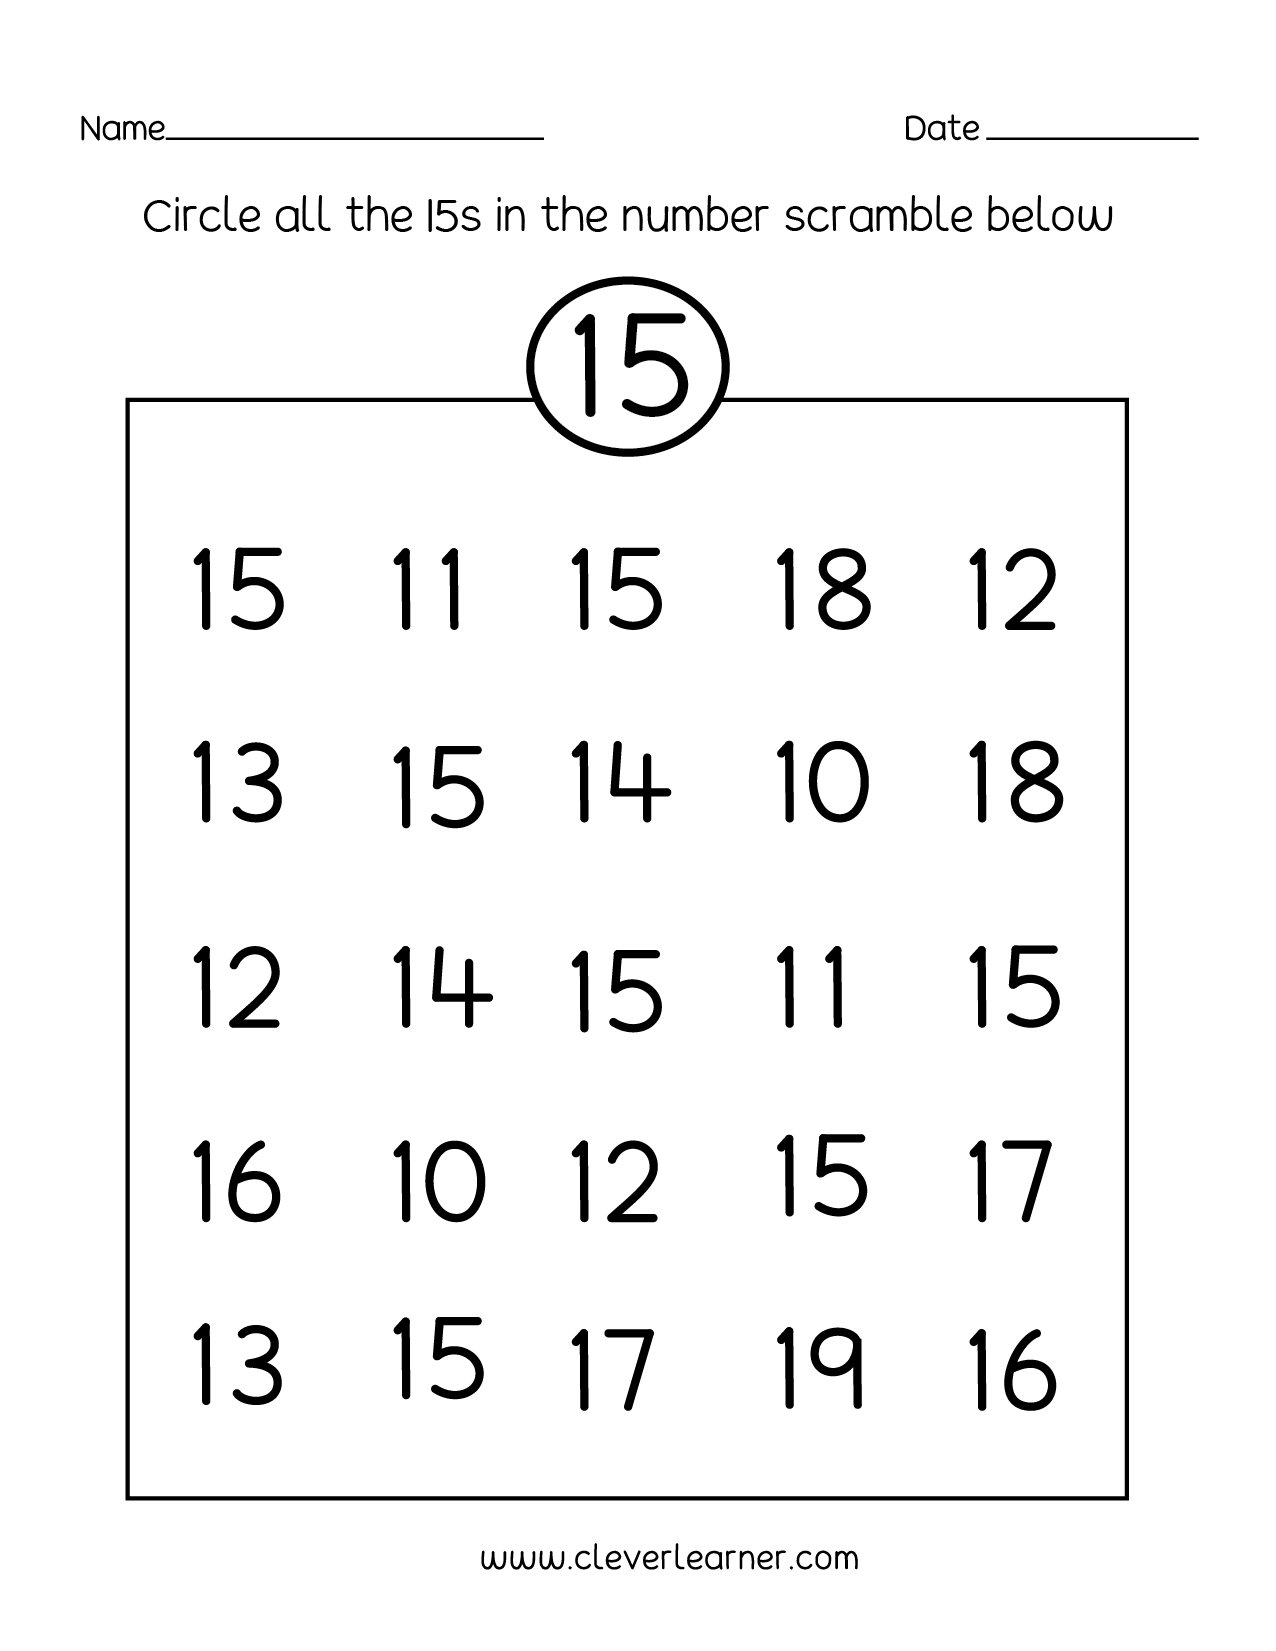 practice-writing-the-numbers-11-15-worksheet-twisty-noodle